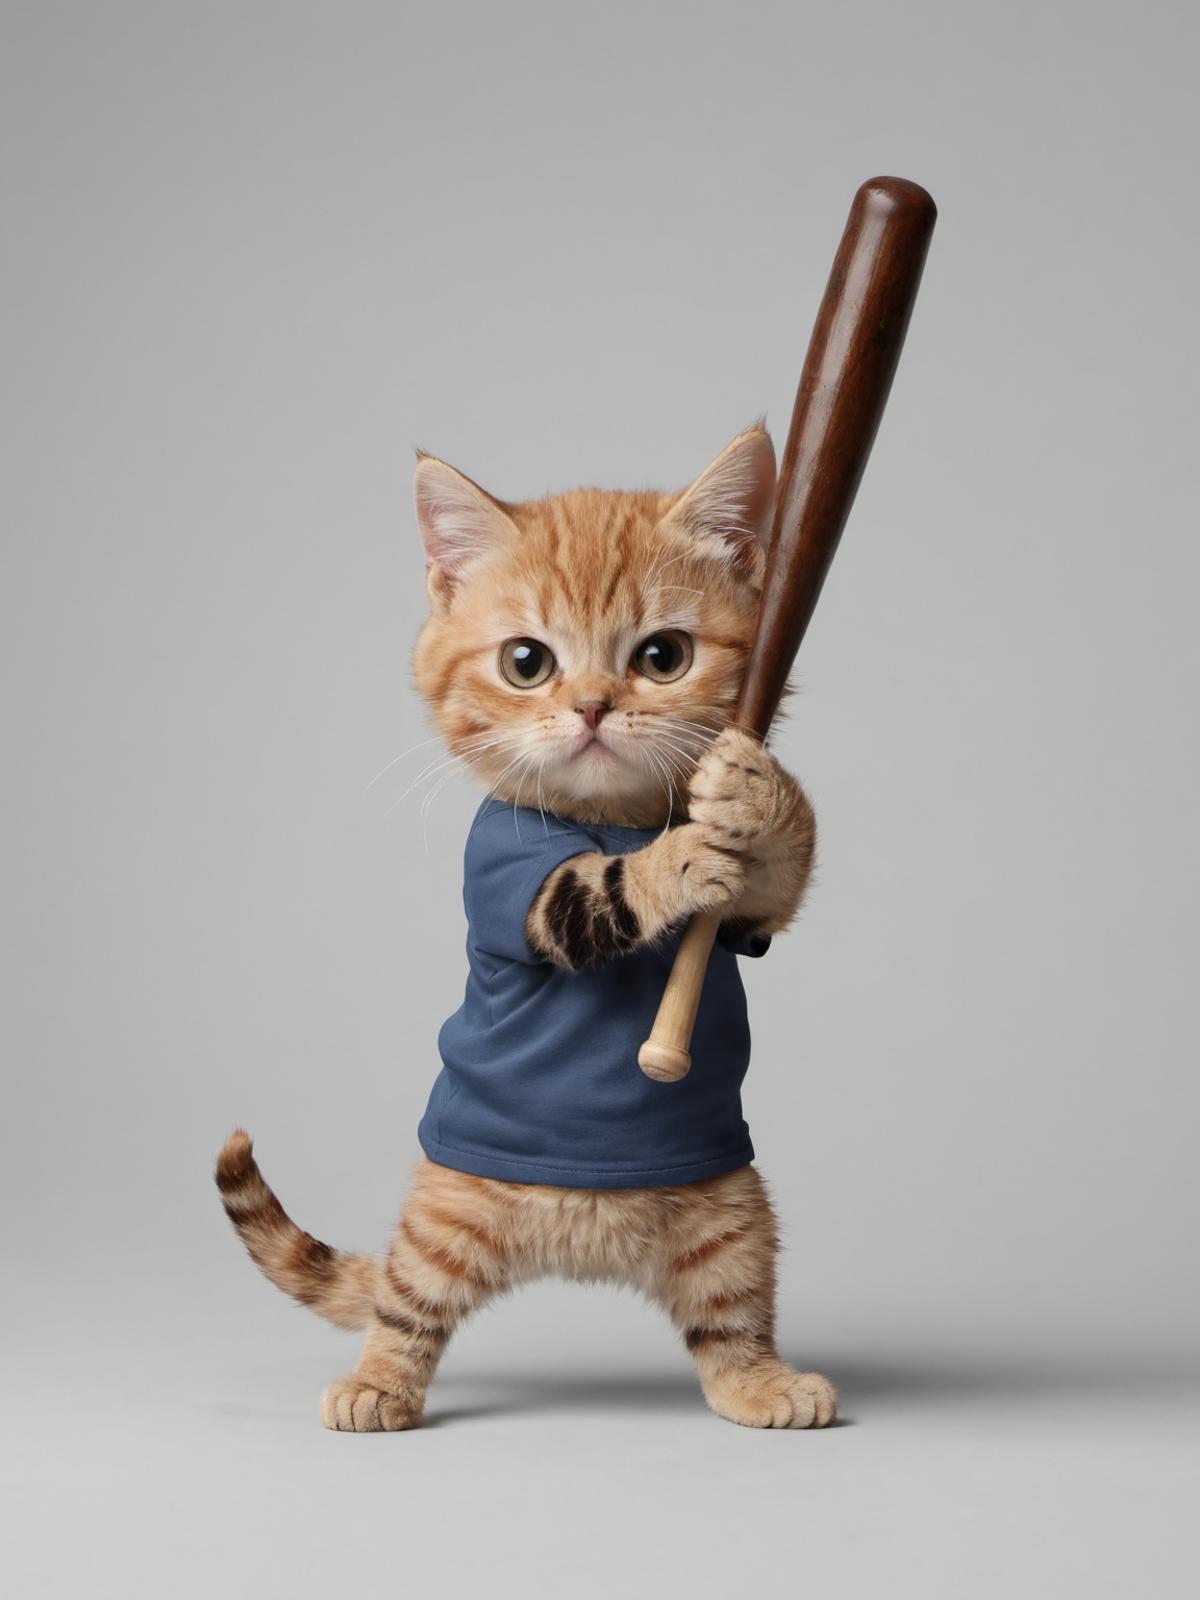 A small orange and white cat in a blue shirt holding a baseball bat.